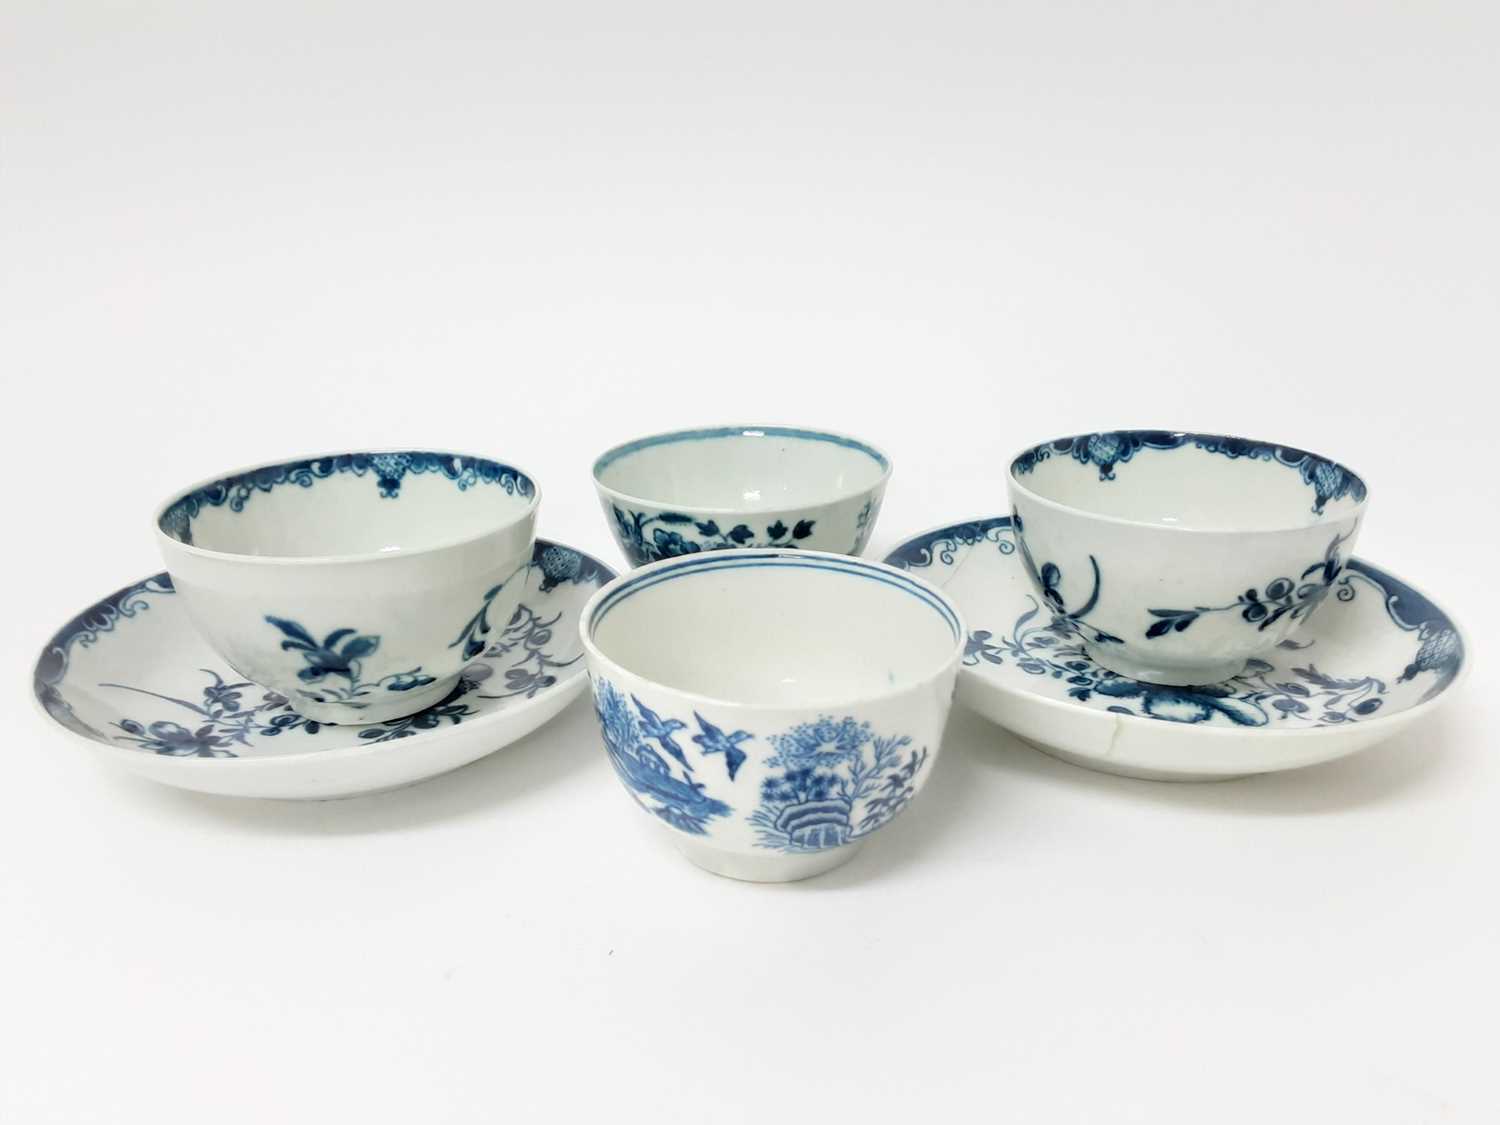 Two Worcester Mansfield pattern tea bowls and saucers, circa 1770, and two other blue and white Worc